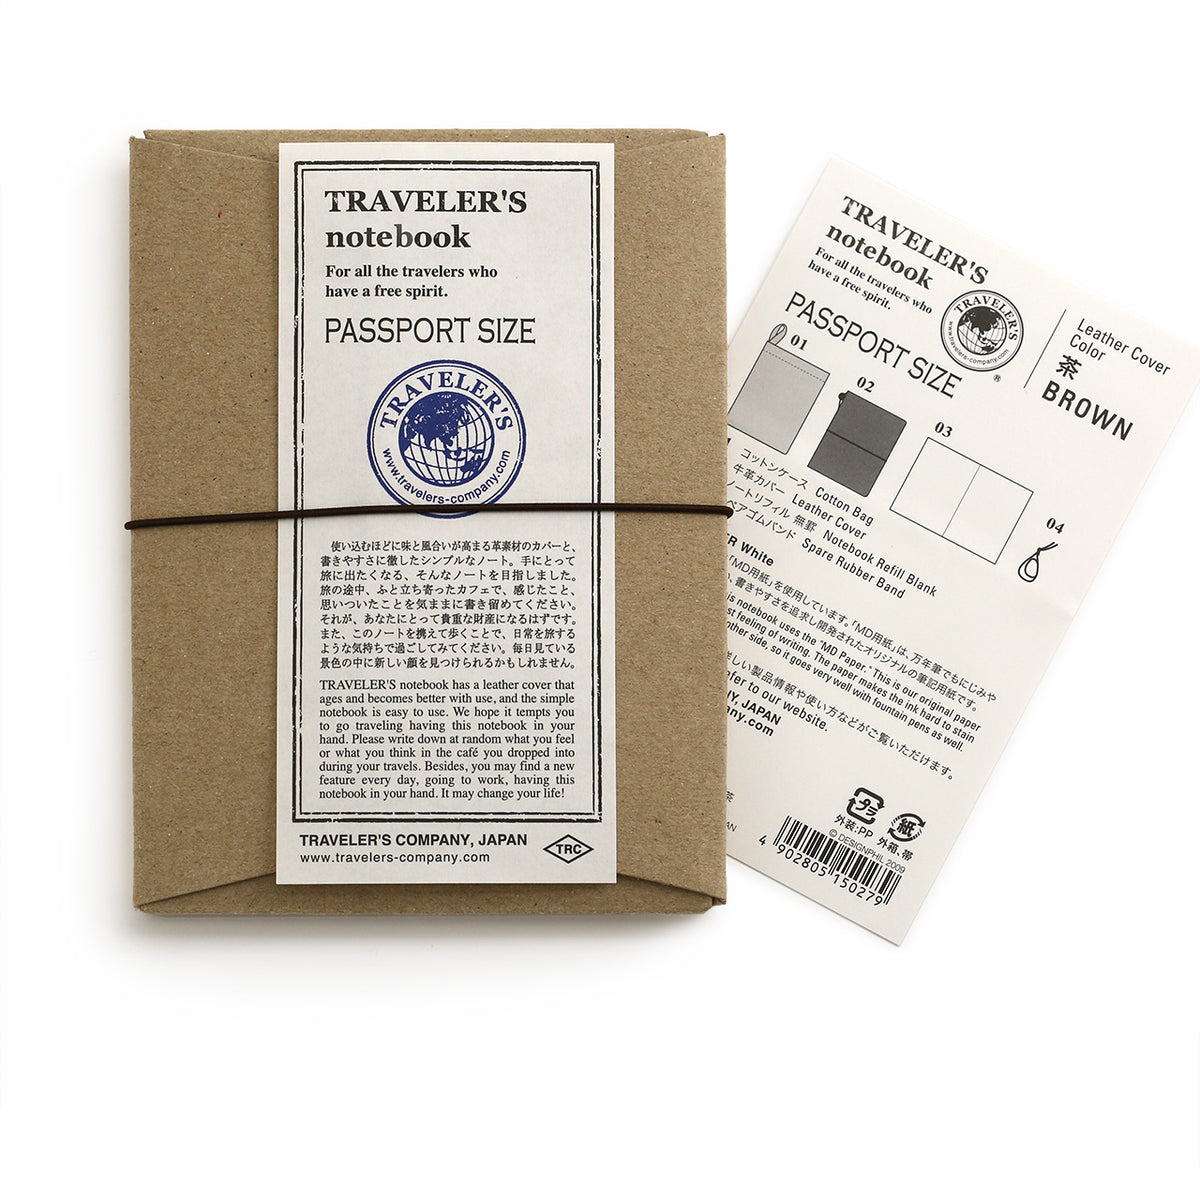 Outer packagging which is rustic craft cardwith information sheets in japanese and english, and an enveloping elastic